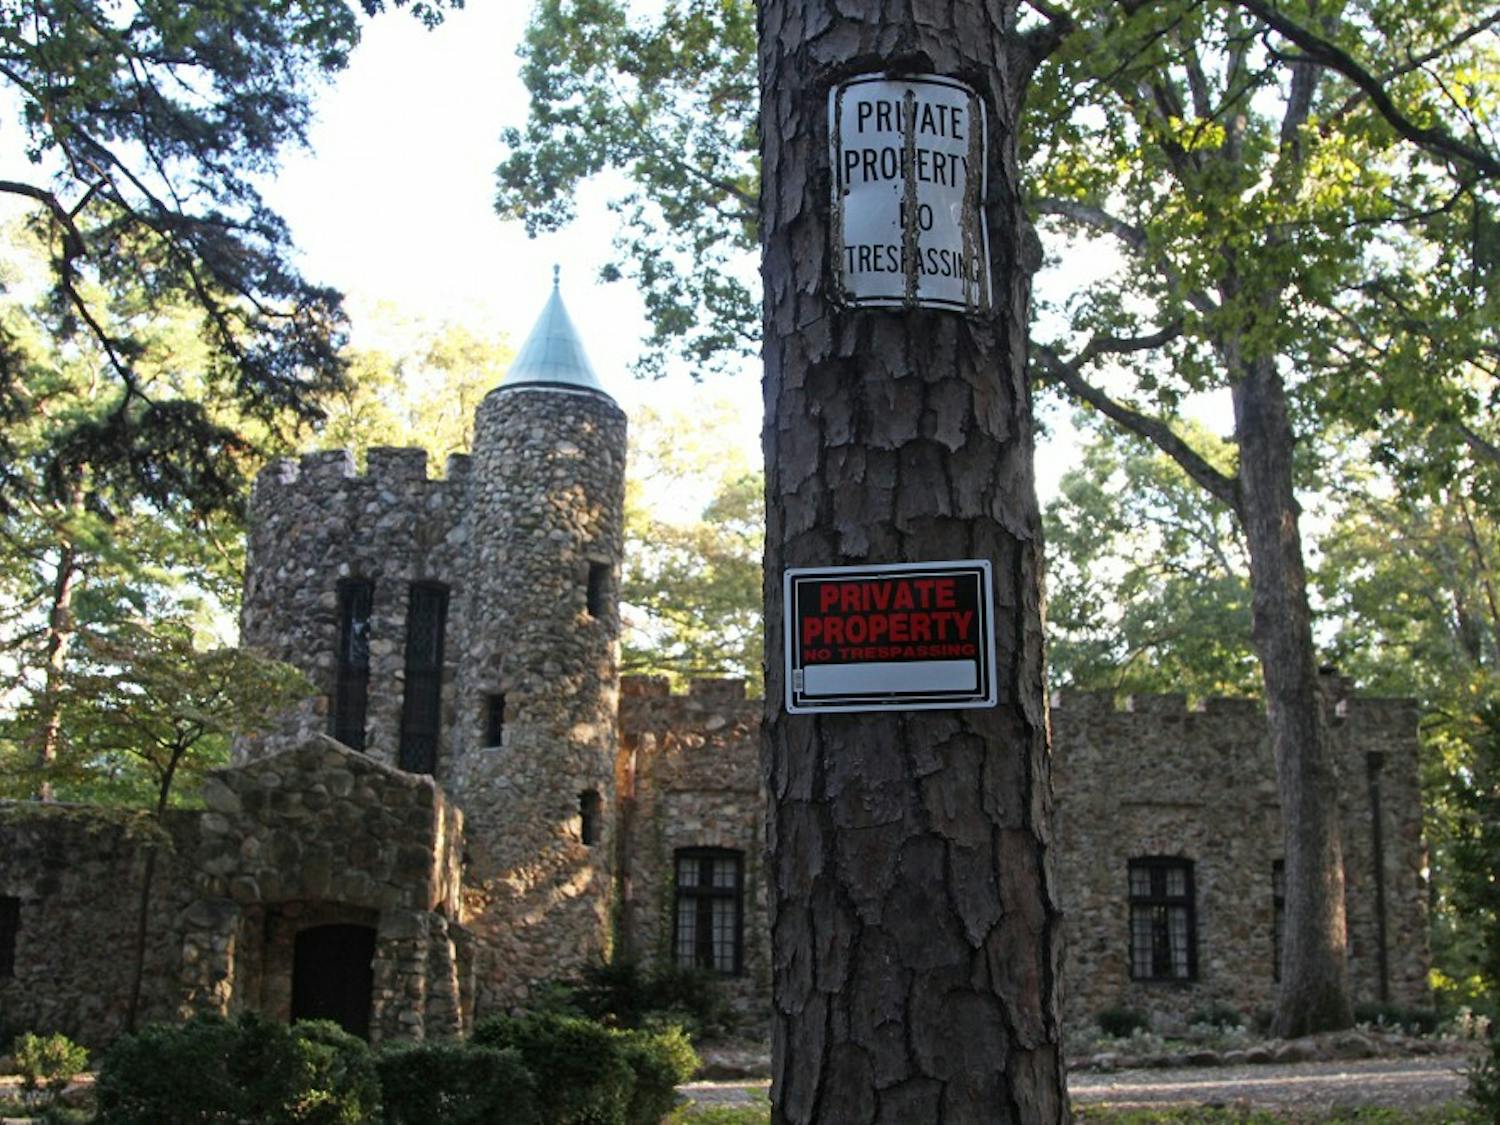 Gimghoul Castle, at the end of Gimghoul Rd. on north campus, is the heart of mystery and secrets for the rumored secret society.